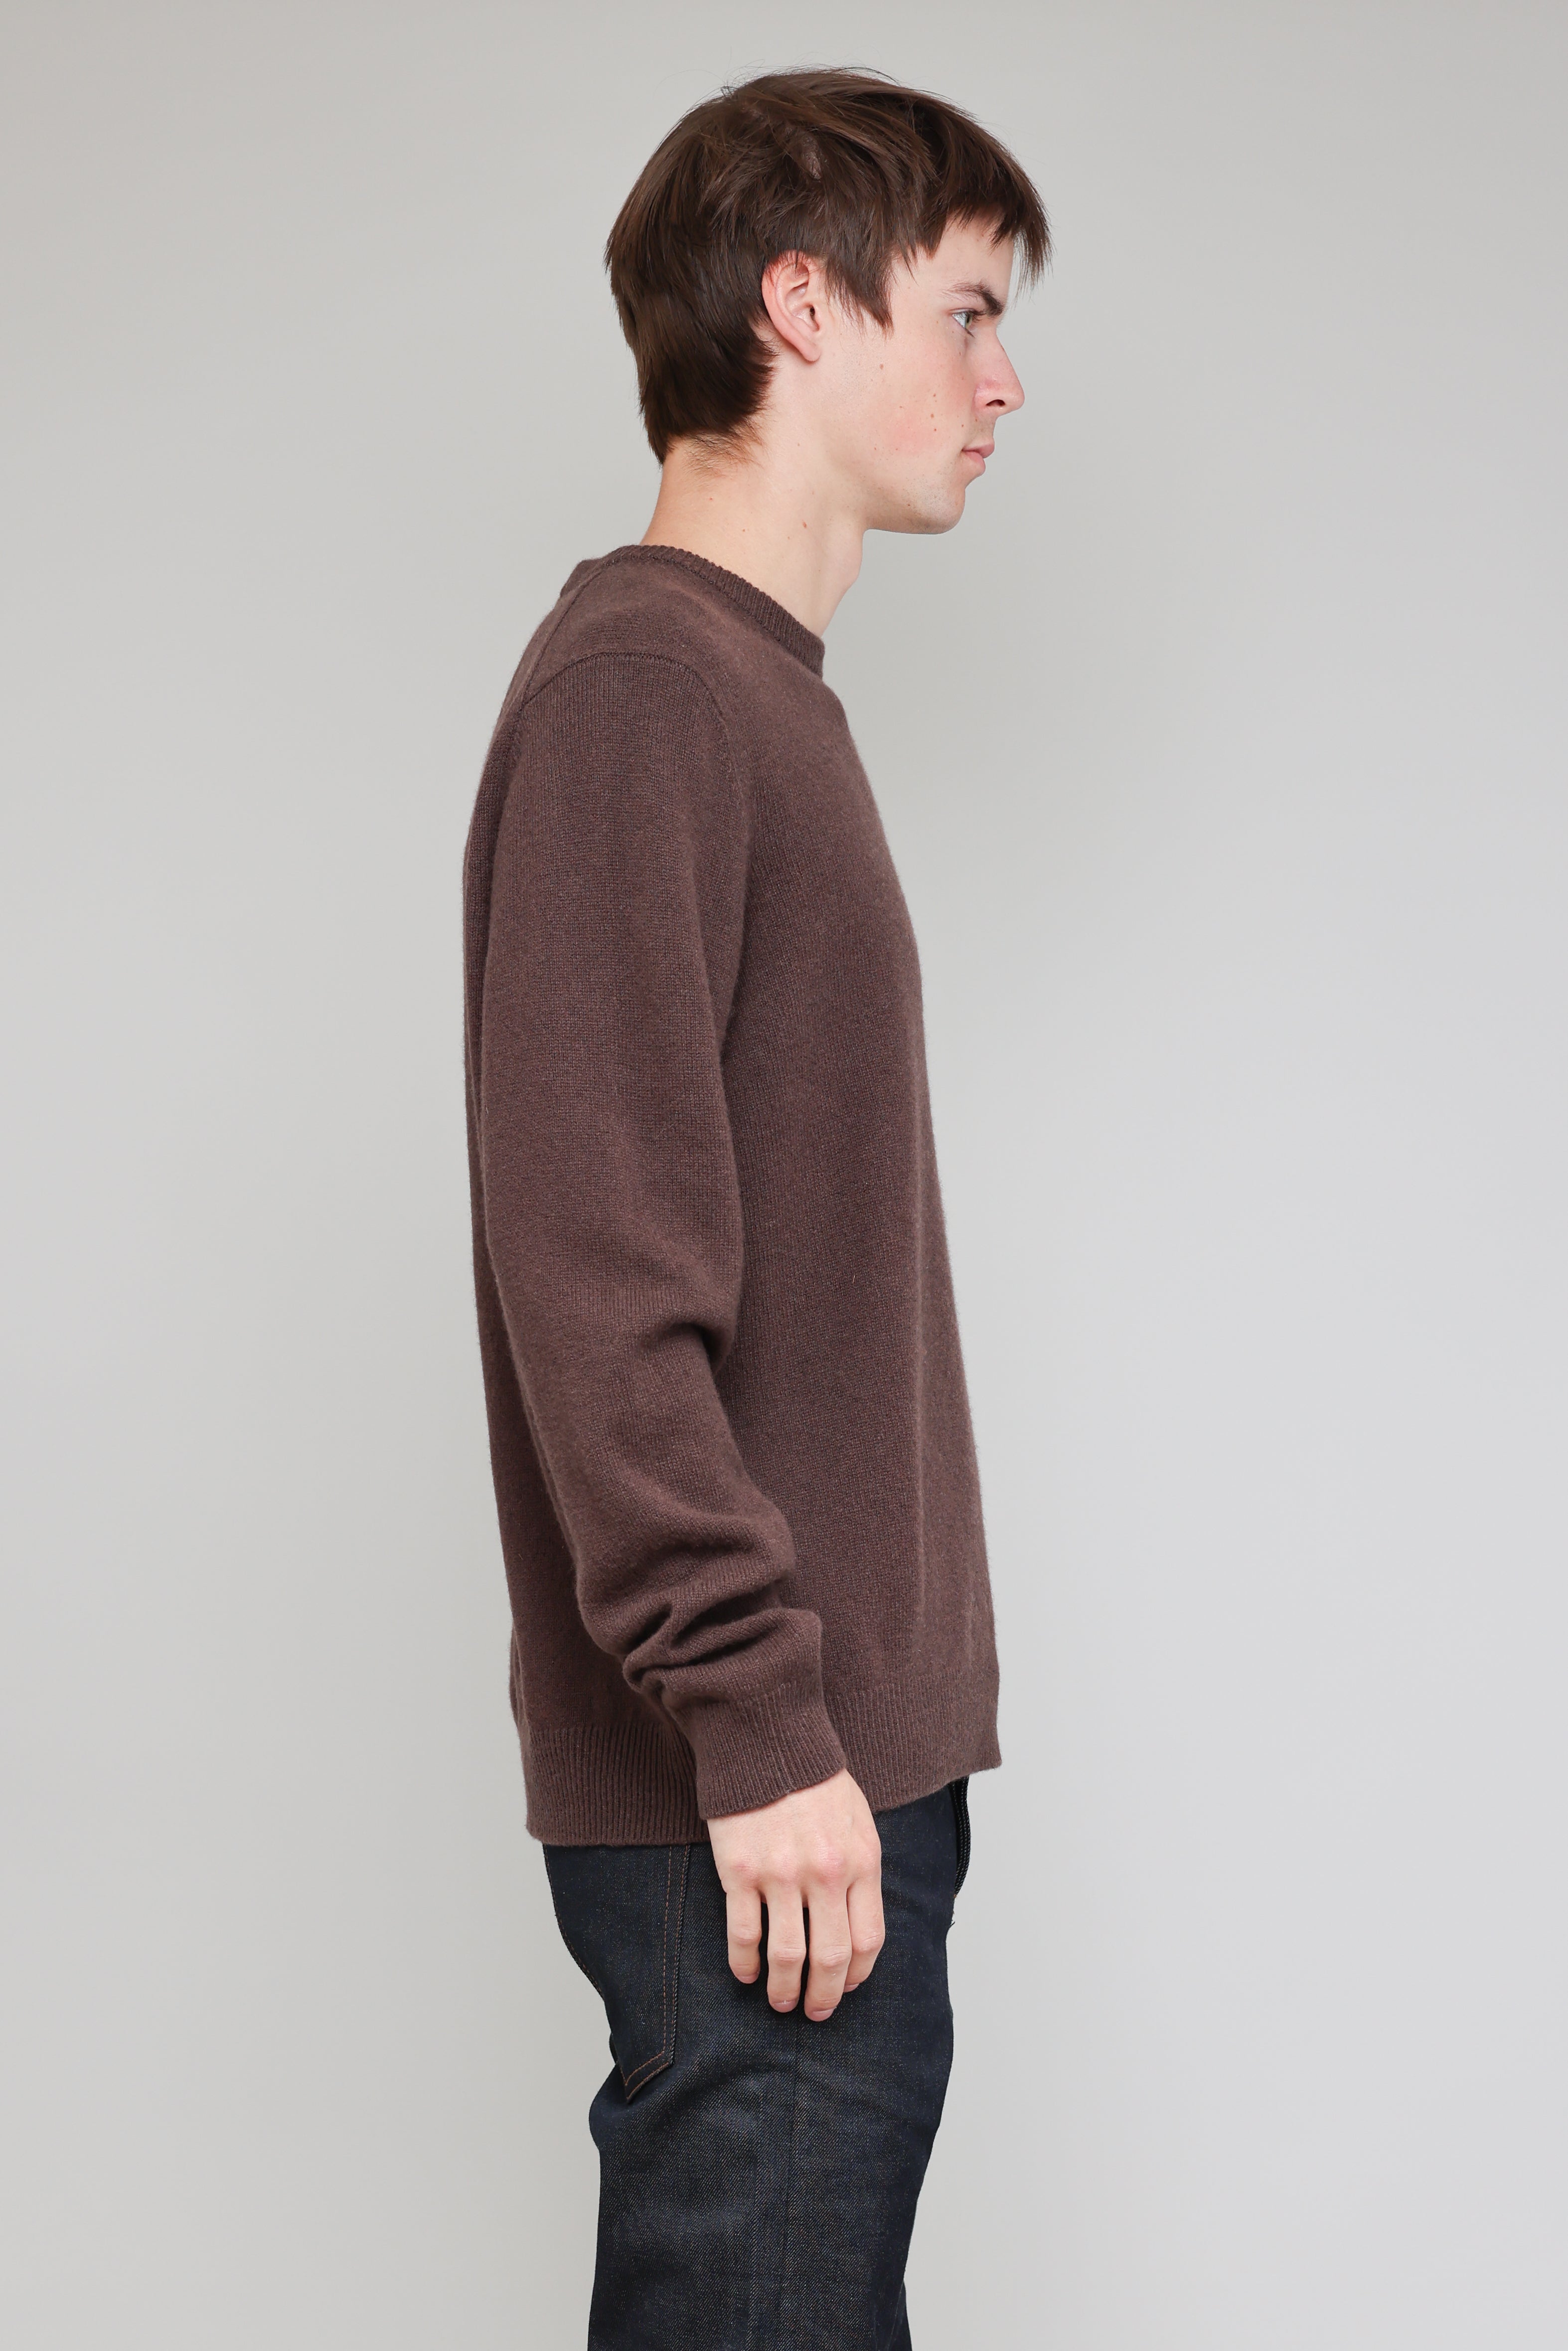 New Wool Crew in Brown 03